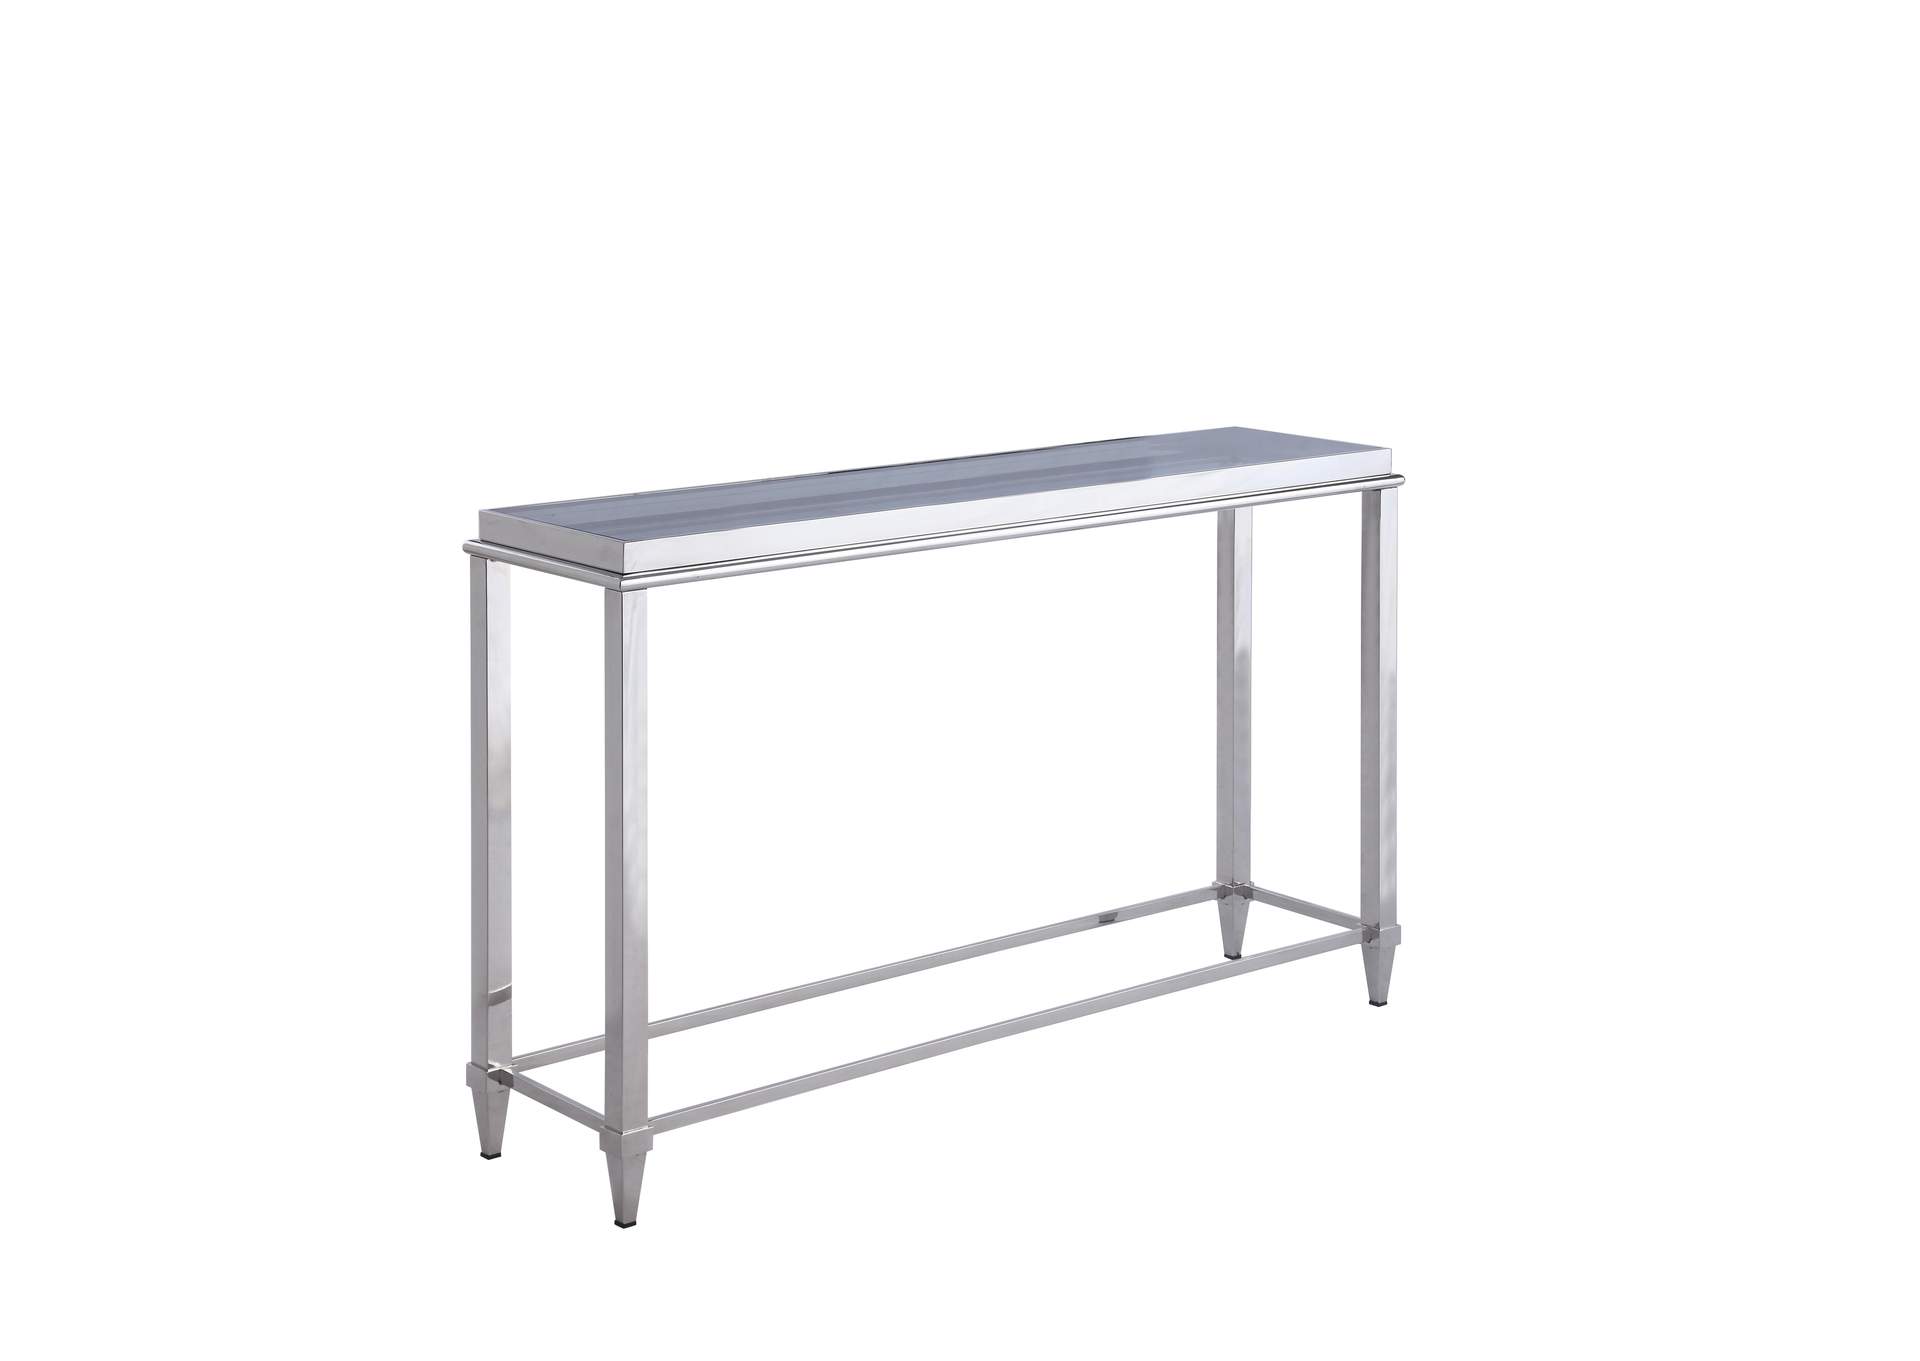 Contemporary Sofa Table With Glass Top & Gray Trim,Chintaly Imports